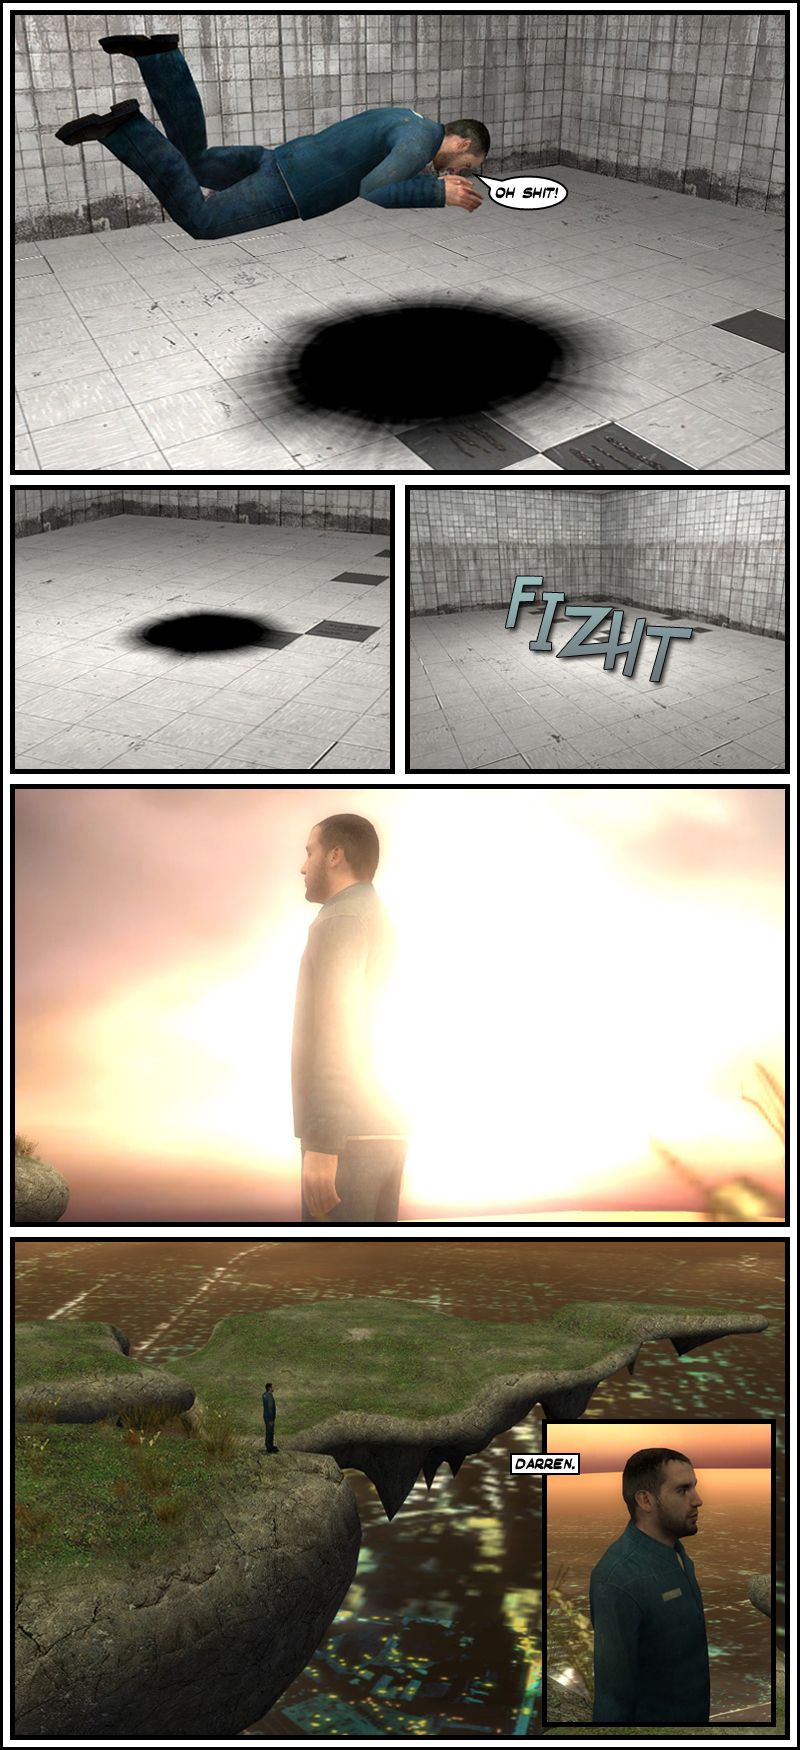 Suddenly, another black hole appears on the ground. Darren says oh, shit as he trips towards it. He falls through and it vanishes. Darren finds himself at the edge of an island of a floating archipelago in the air, far above a city. A voice calls out to Darren.